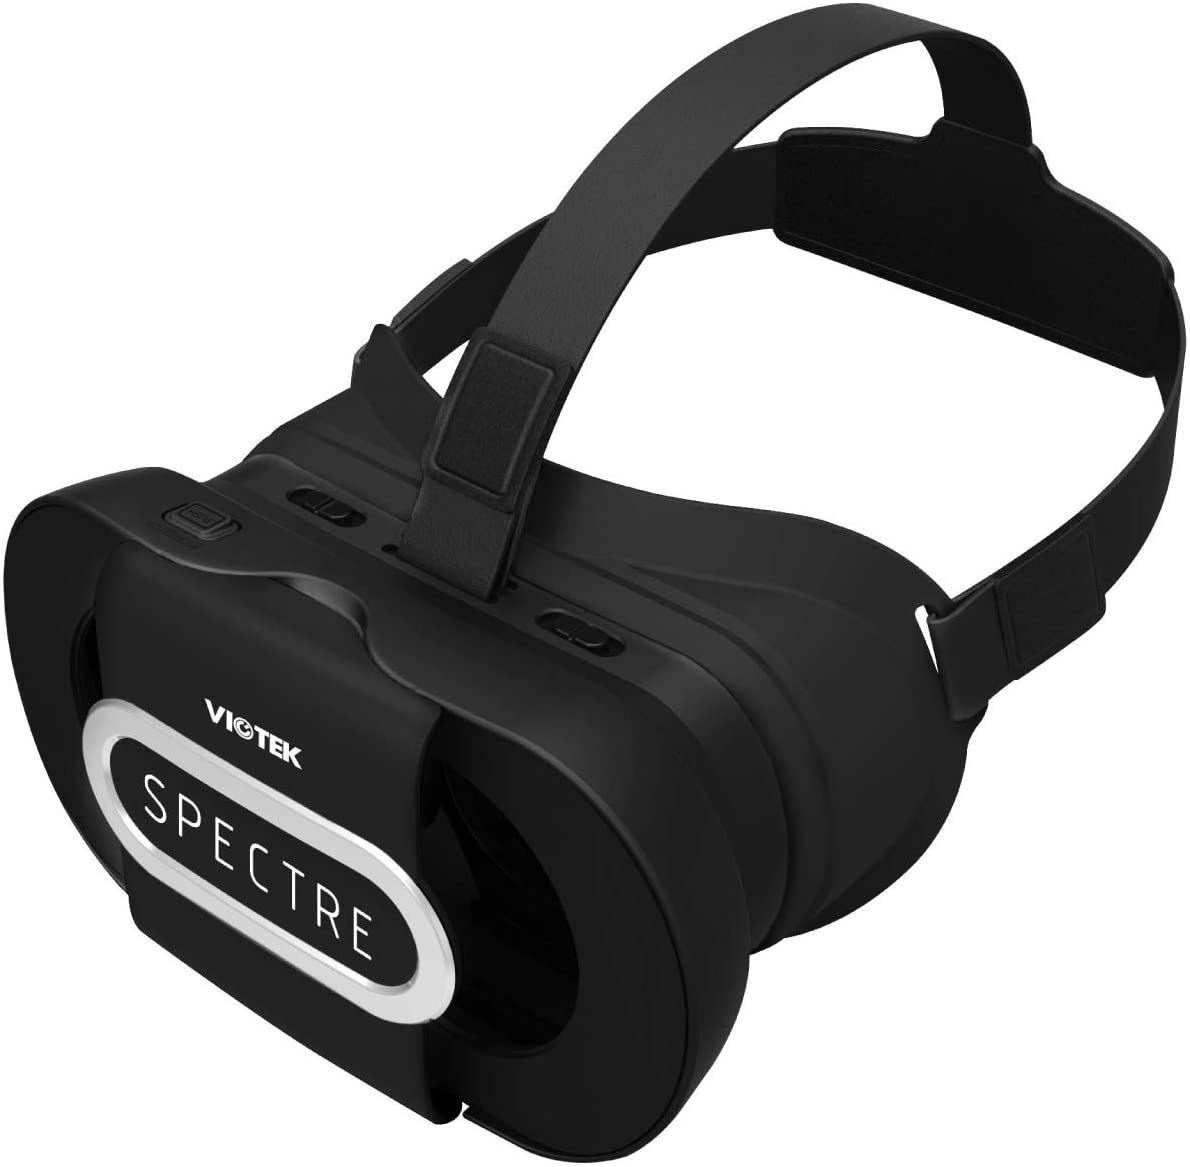 The 7 Best Budget VR Headsets